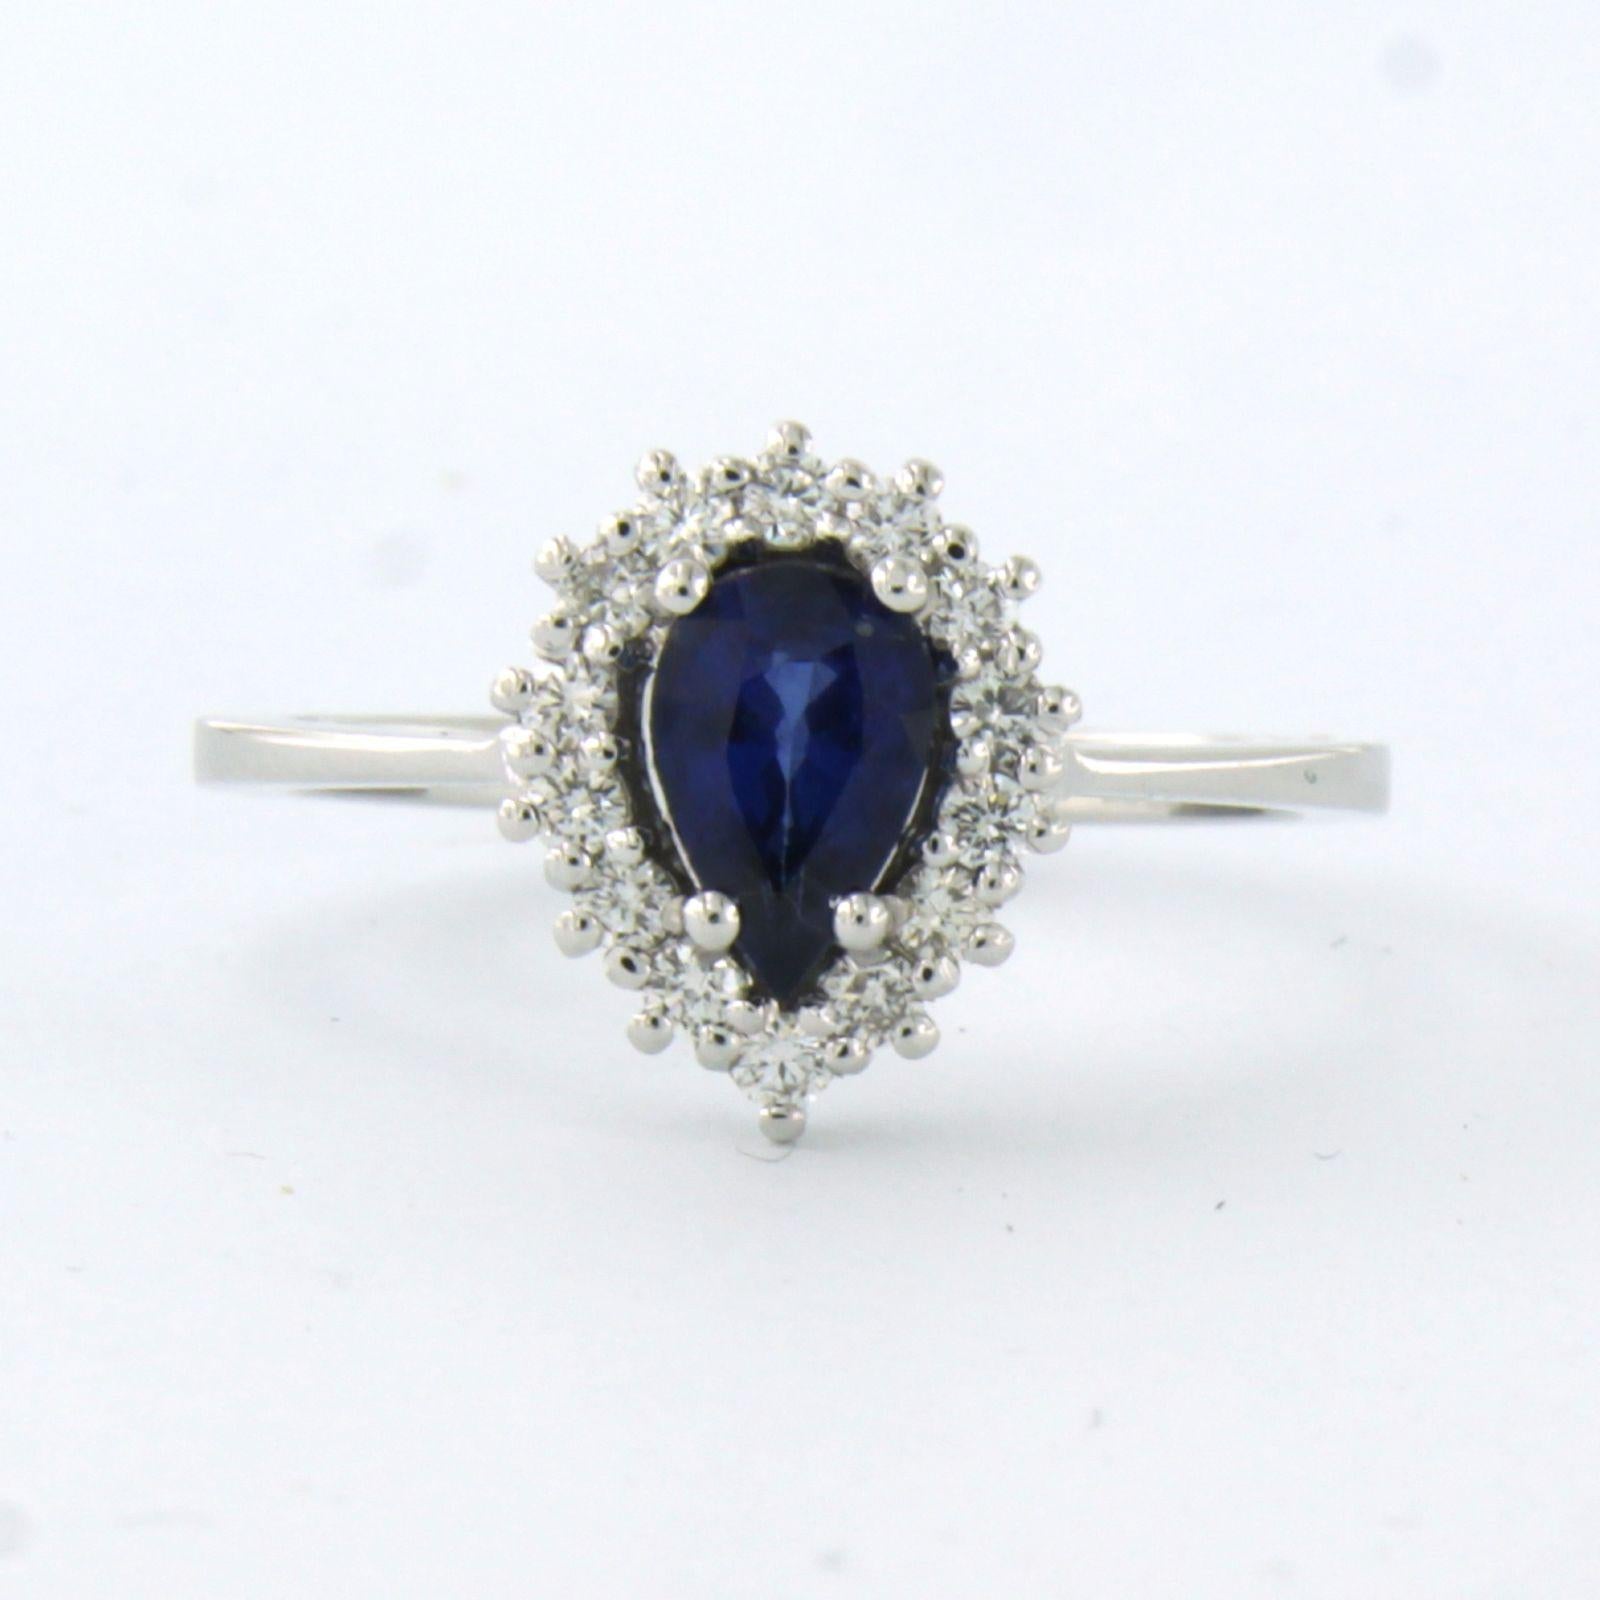 18k white gold ring set met sapphire and brilliant cut diamonds 0.26 ct F/G VS/SI - ring size US 7.25 - EU 17.5 (55)

Detailed description

the top of the ring is 1.2 cm wide, and 5.7 mm high

weight 3.2 grams

ring size US 7.25 - EU 17.5 (55), ring